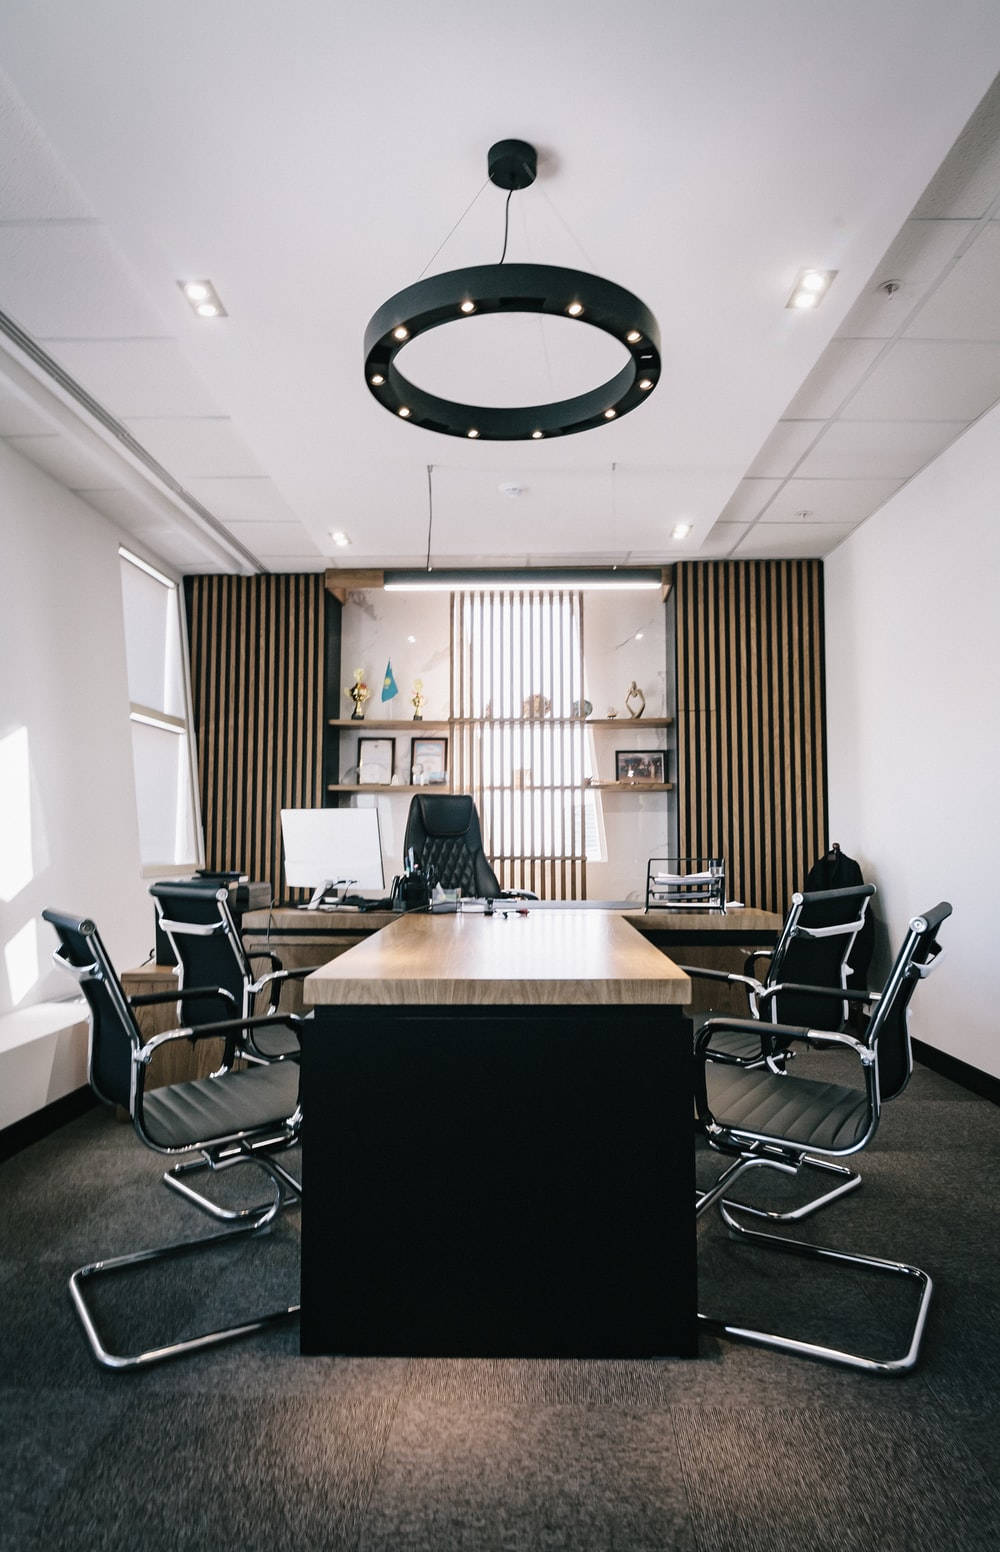 Conference Room With Black And Brown Interior Design Wallpaper